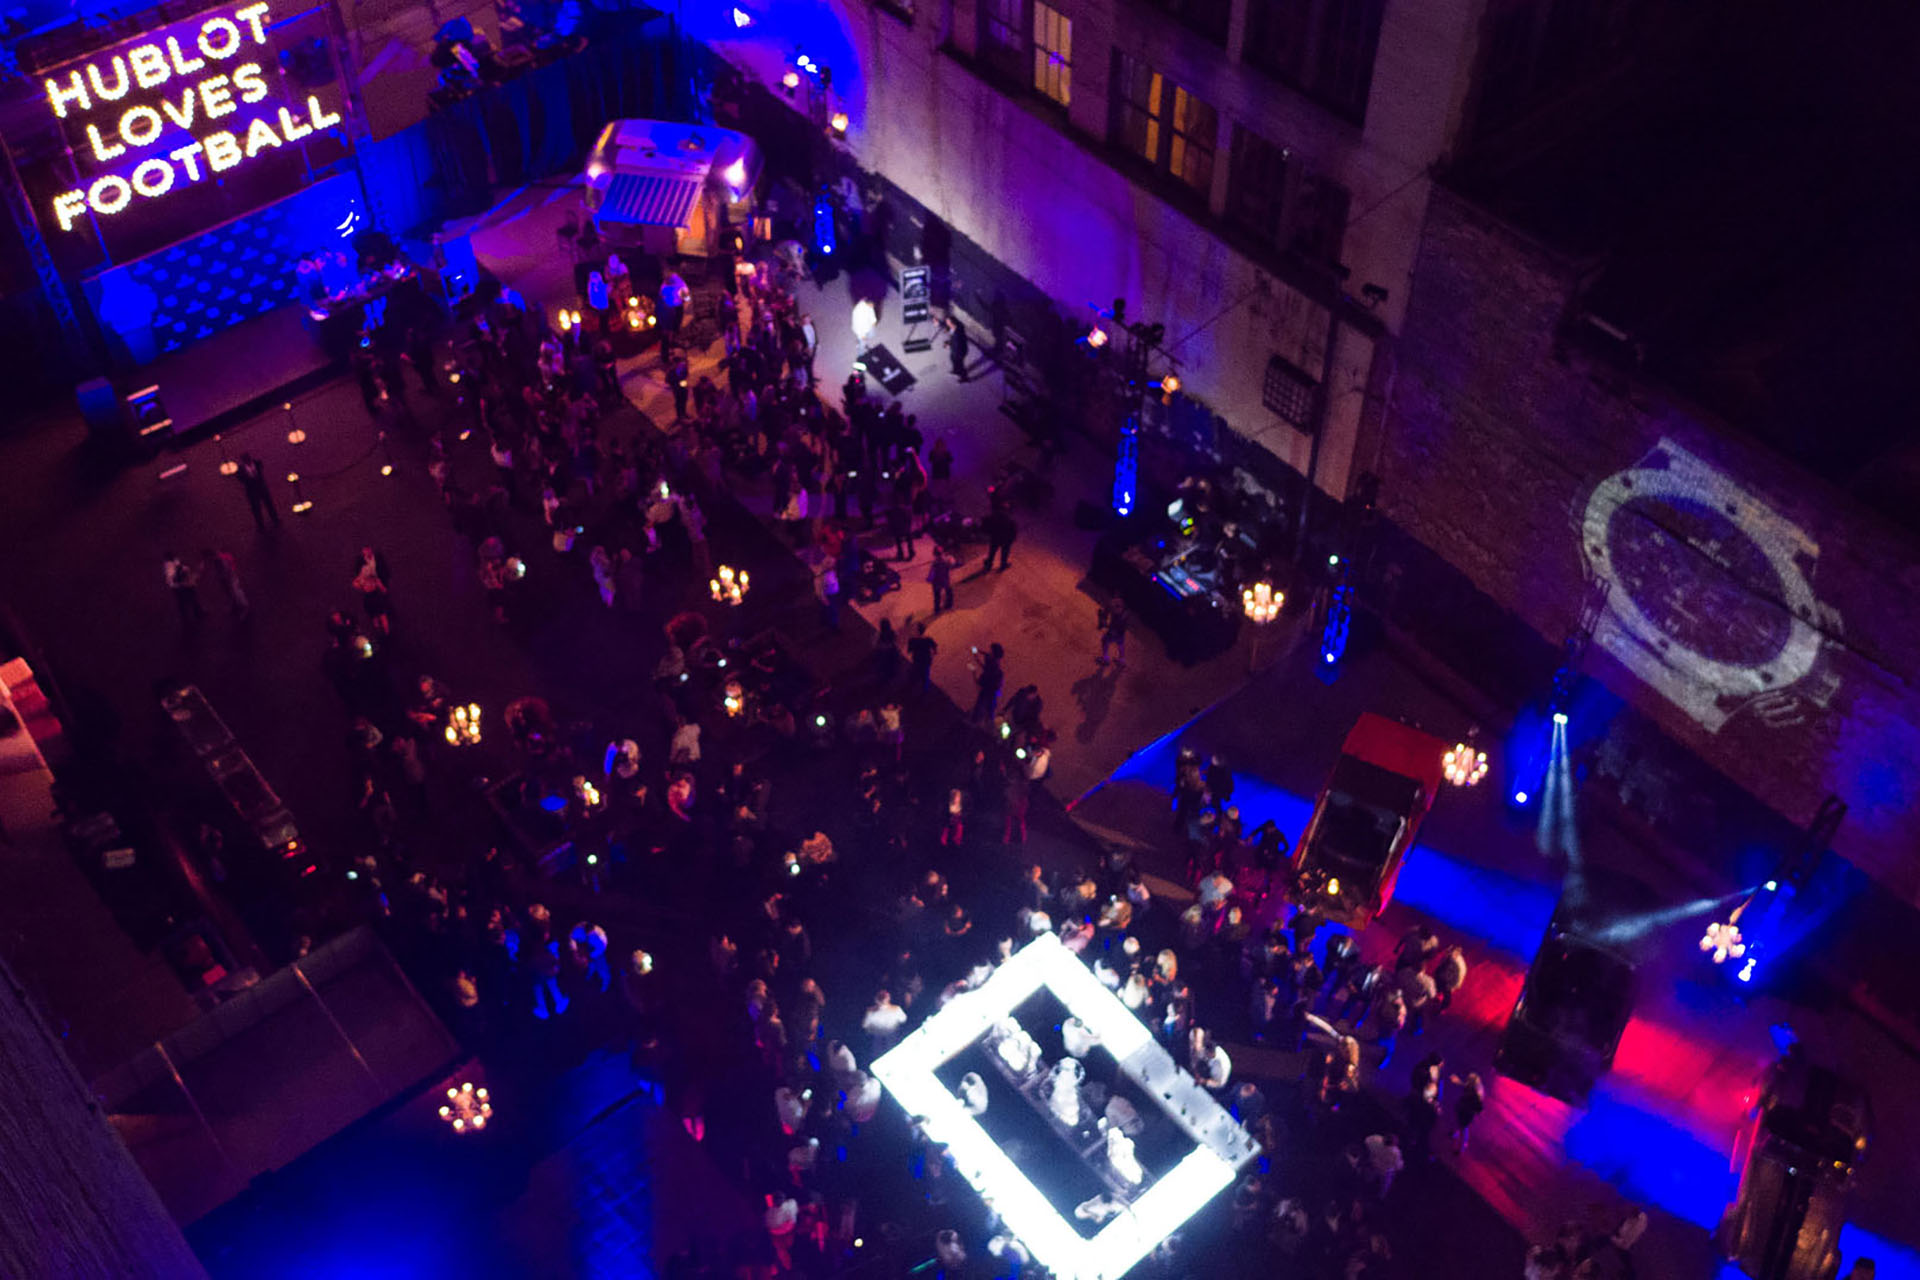 Aerial view of the New York Giants x Hublot launch event